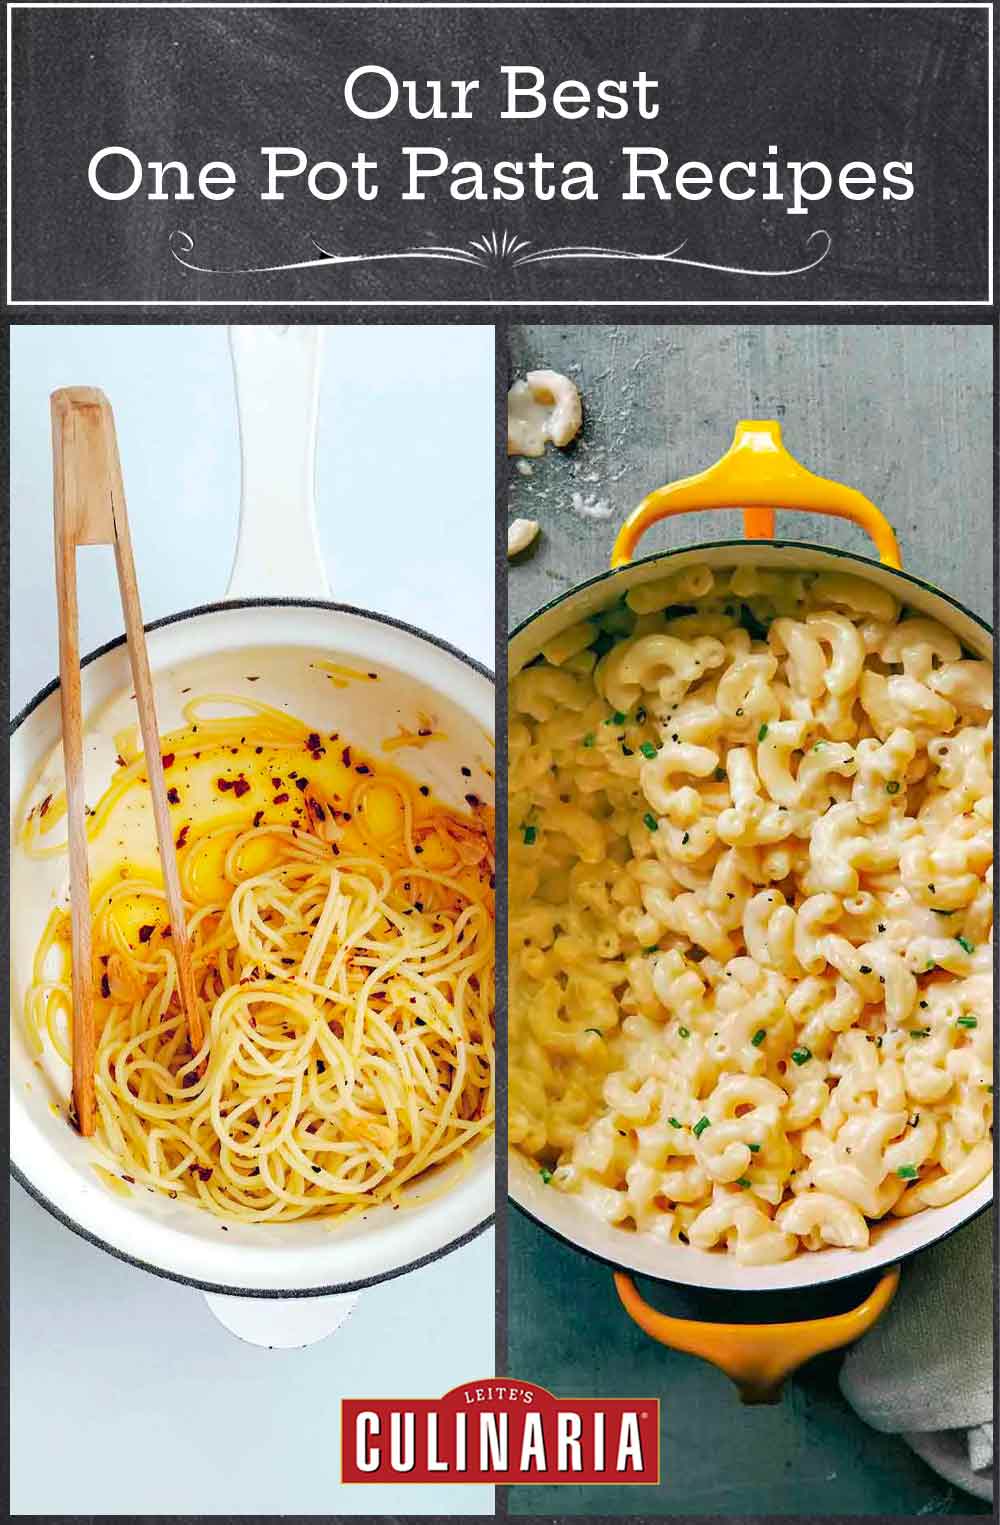 Images of 2 of the 6 one pot pasta recipes -- spaghetti with garlic and chile flakes and 3 ingredient mac and cheese.